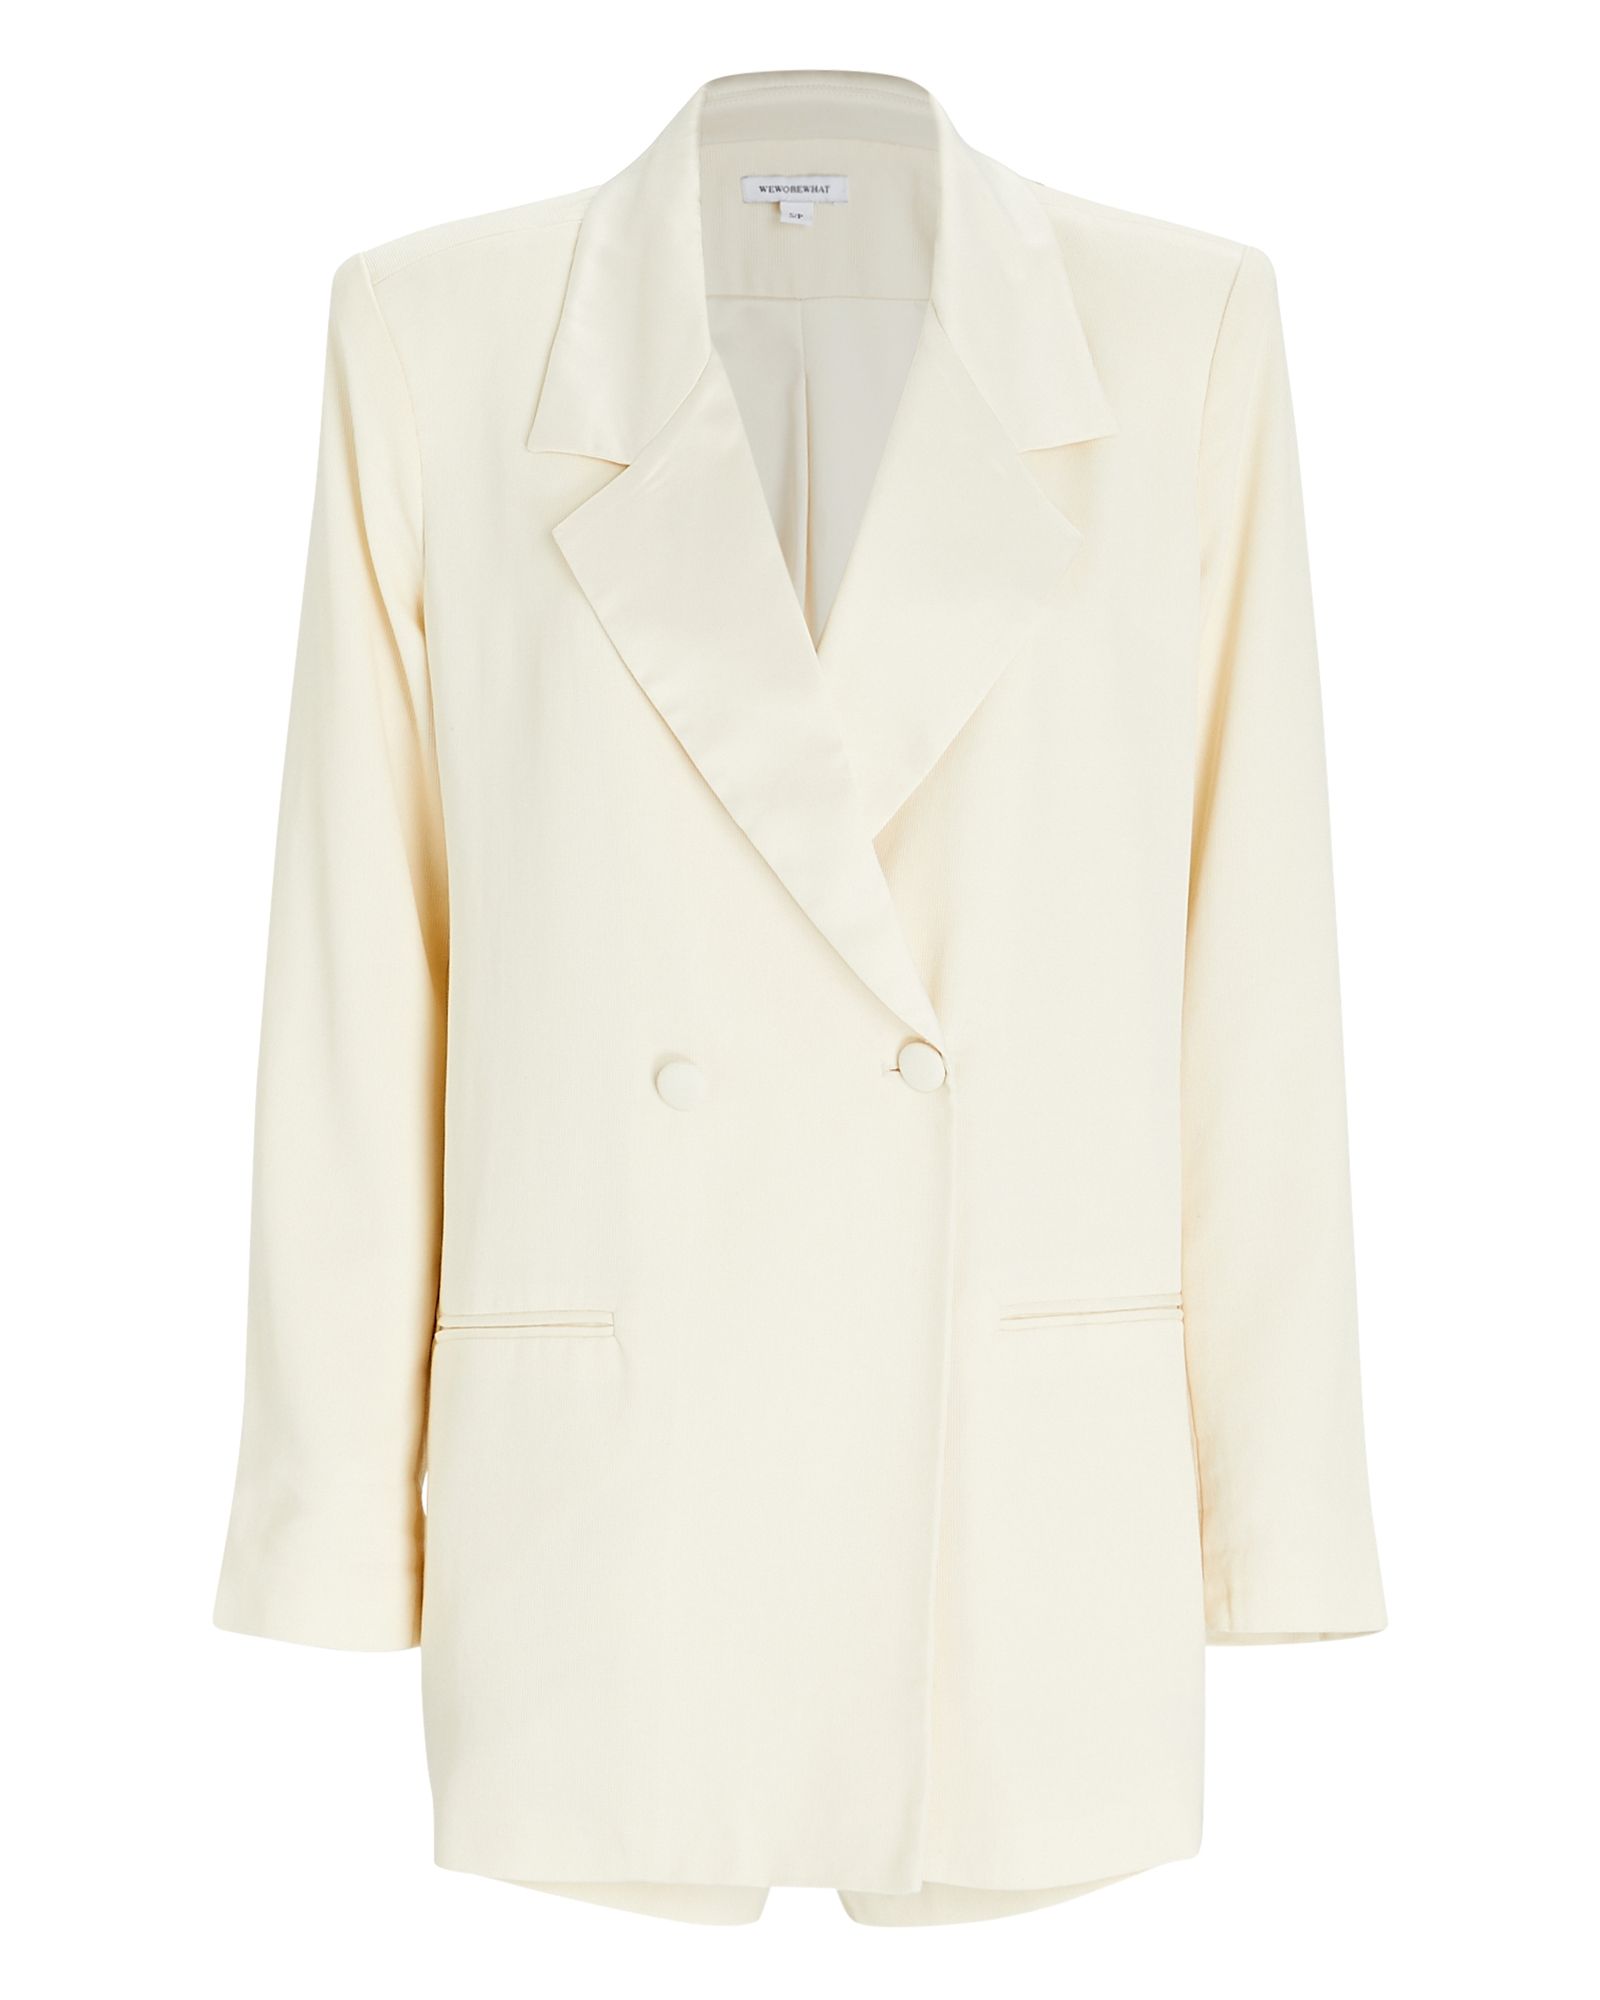 WeWoreWhat Double-Breasted Blazer Romper, White P | INTERMIX